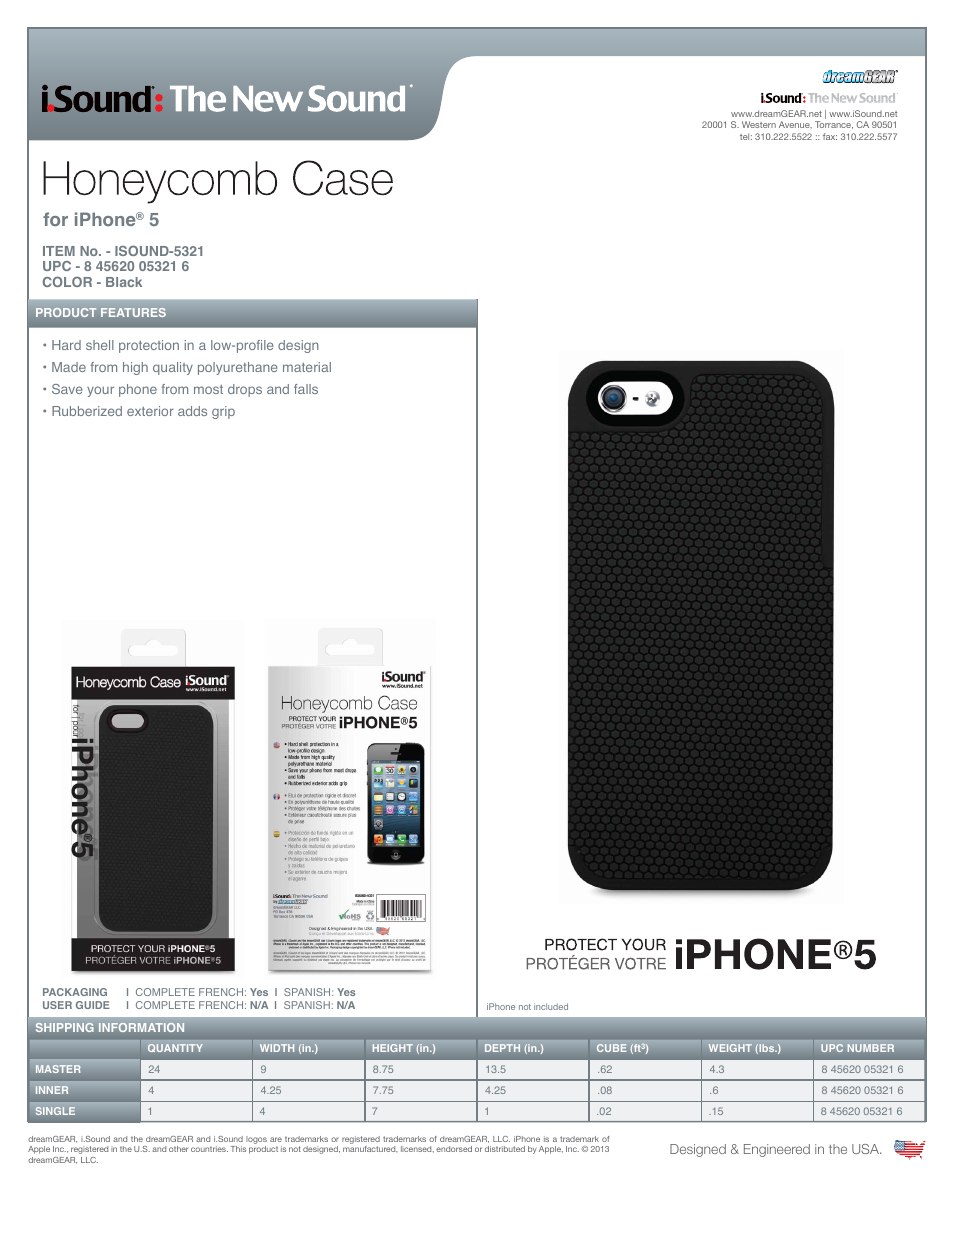 Honeycomb Case for iPhone5s - Sell Sheet